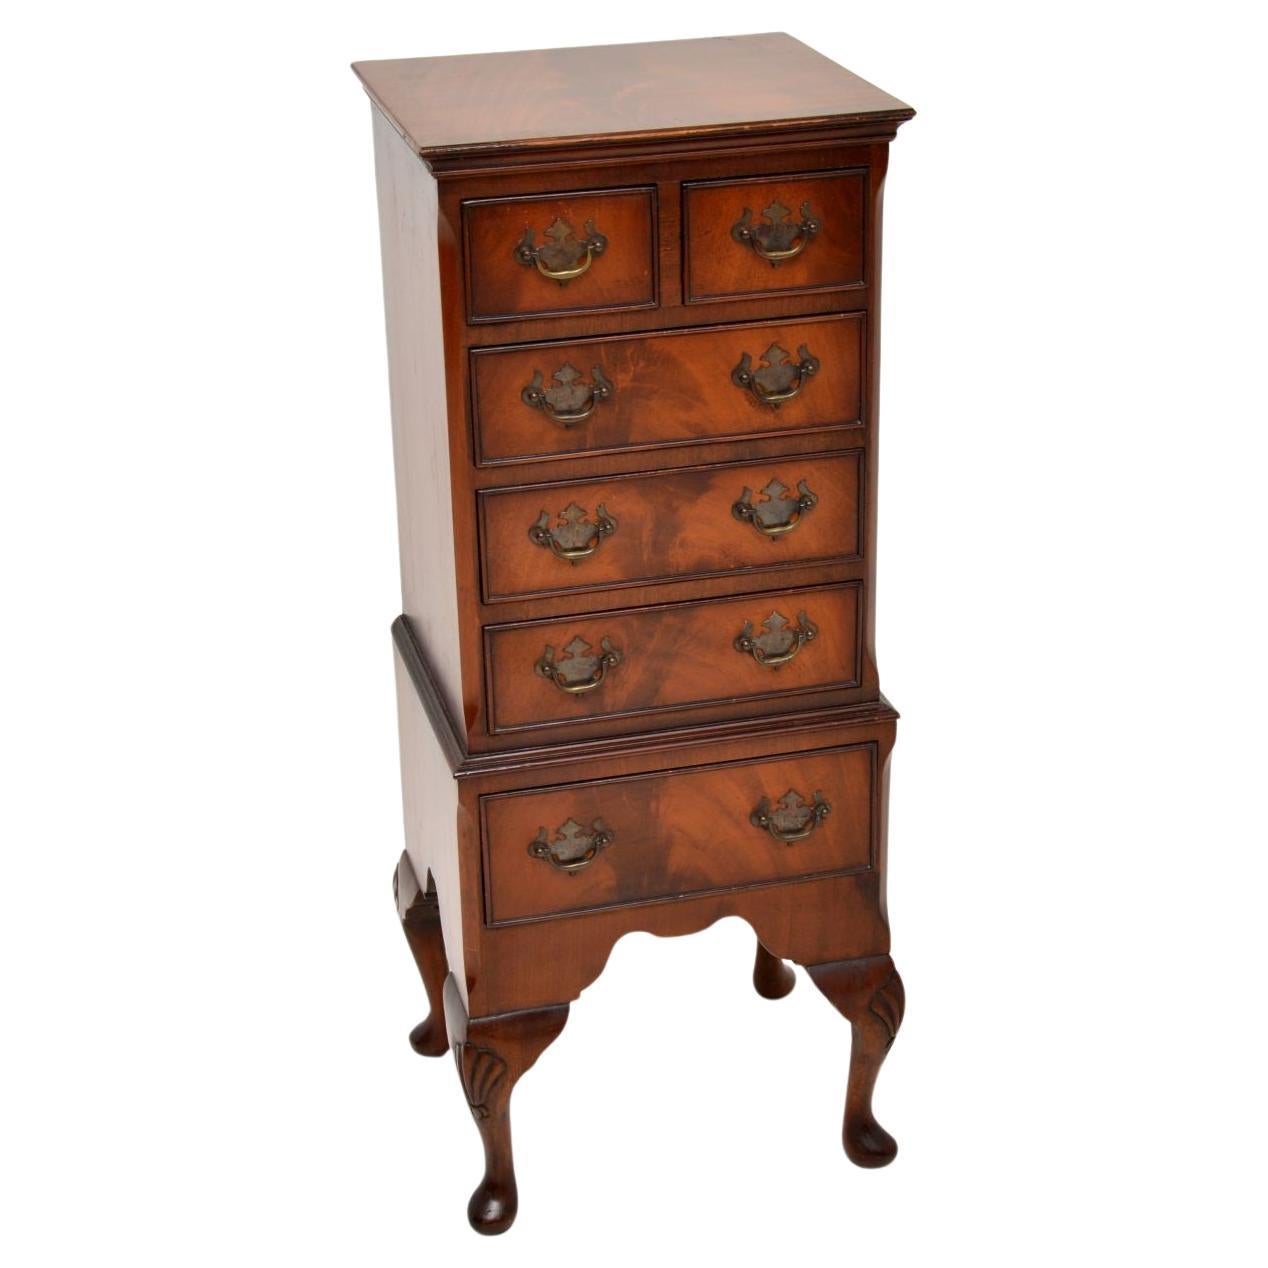 Antique Chest of Drawers on Legs